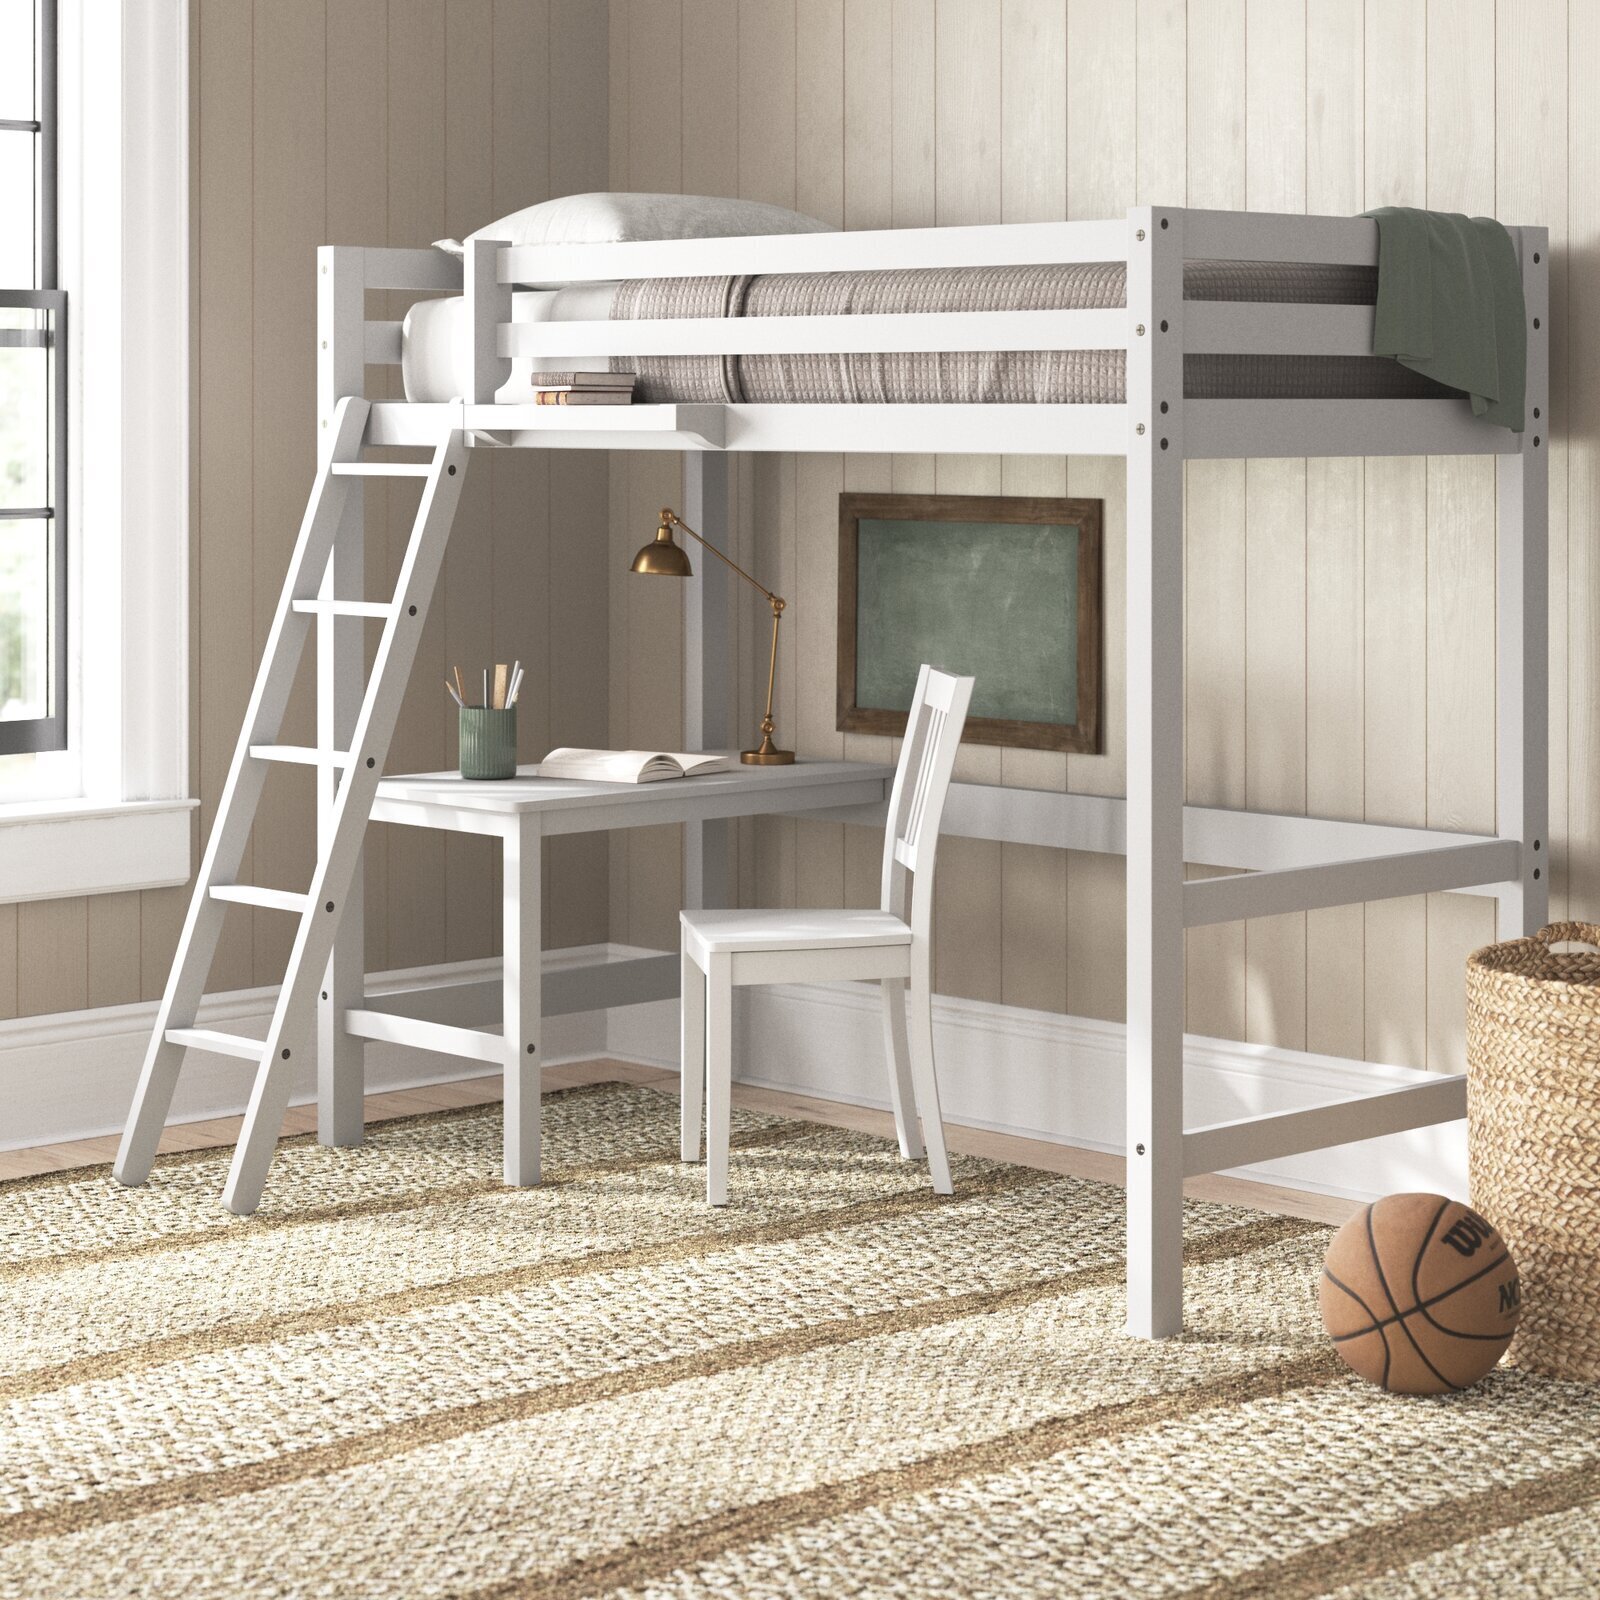 Loft bed with ladder style steps